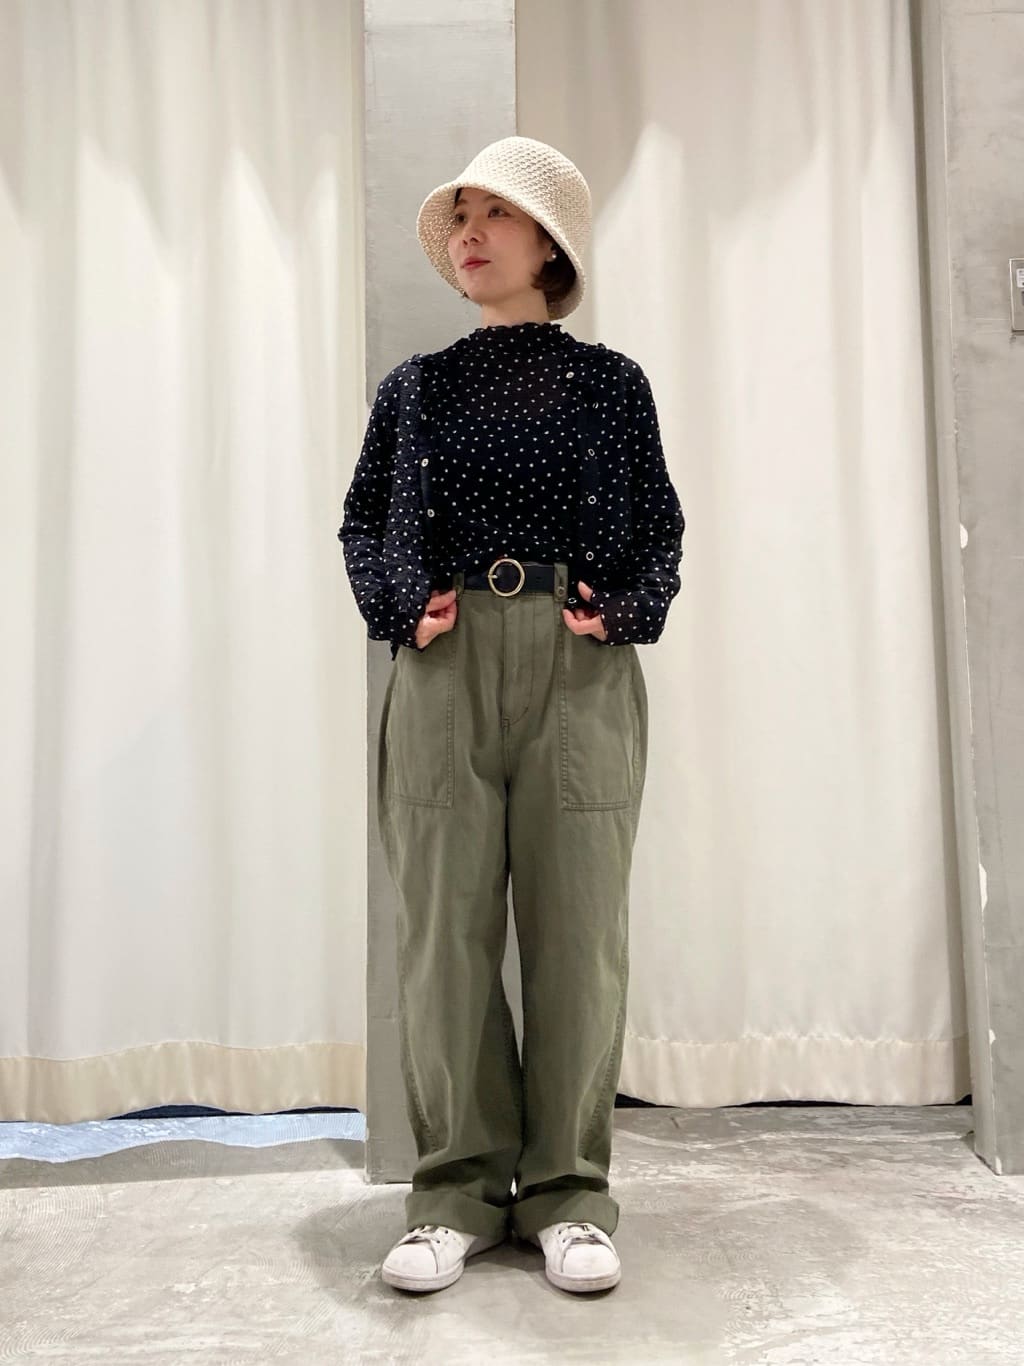 AMBIDEX Store 〇丸真鍮 太革ベルト(F クロ): Dot and Stripes CHILD WOMAN